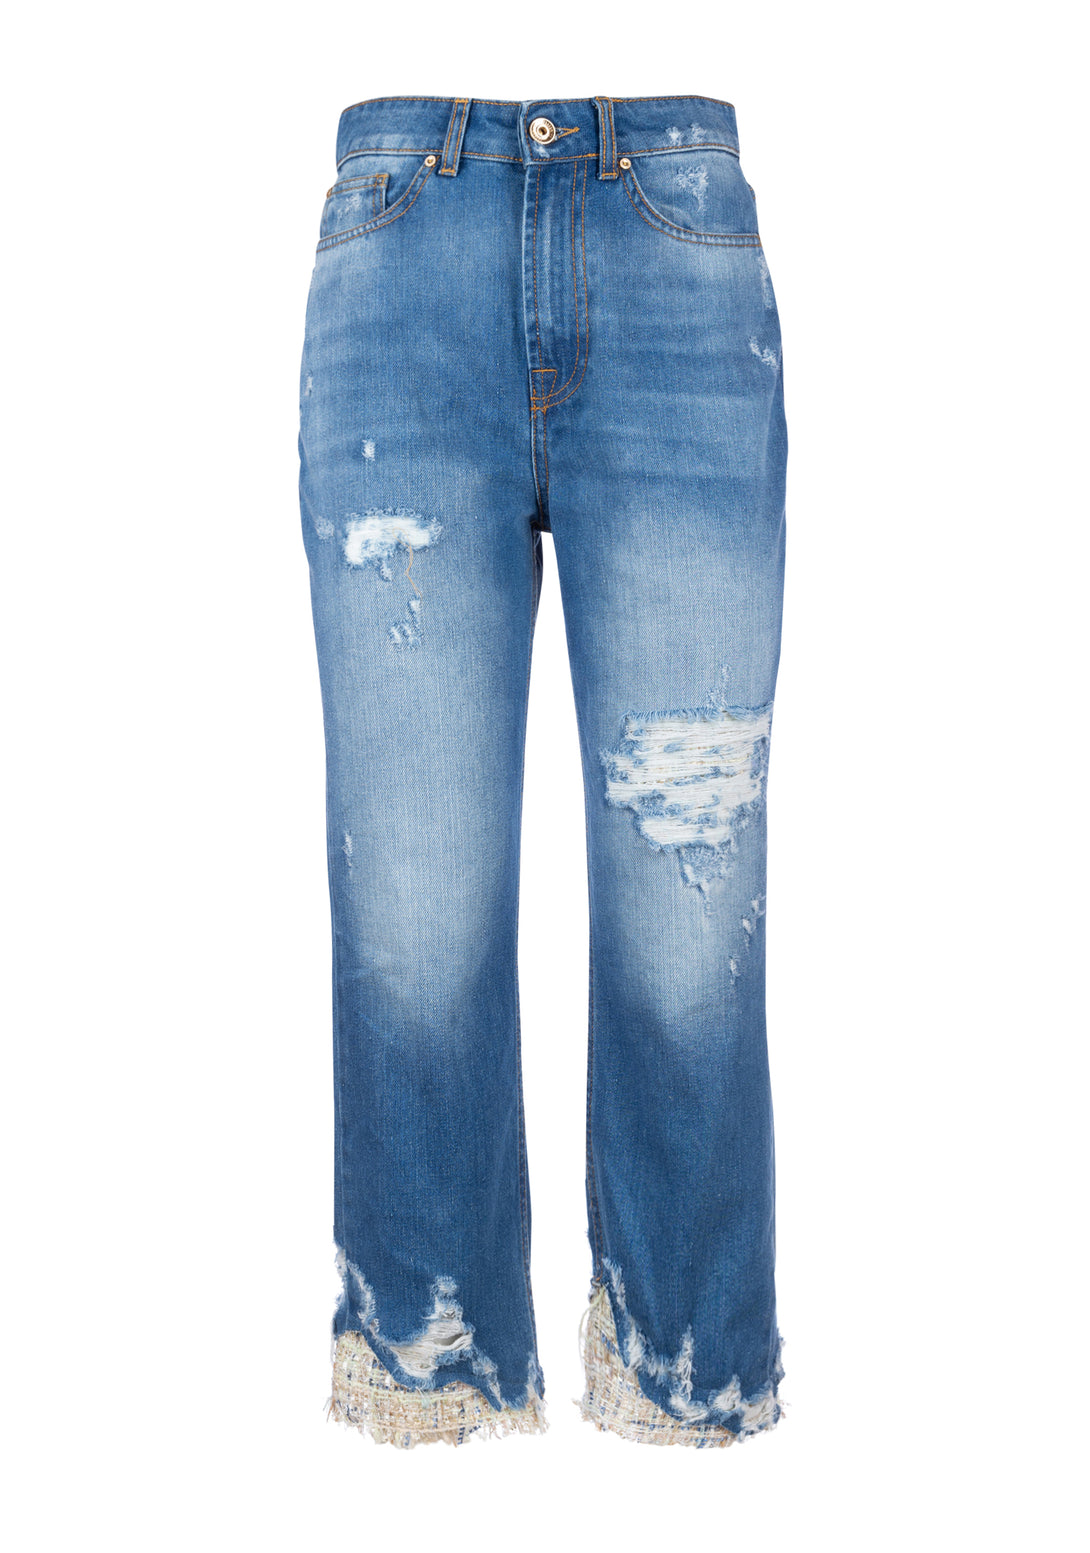 Jeans cropped made in denim with strong wash